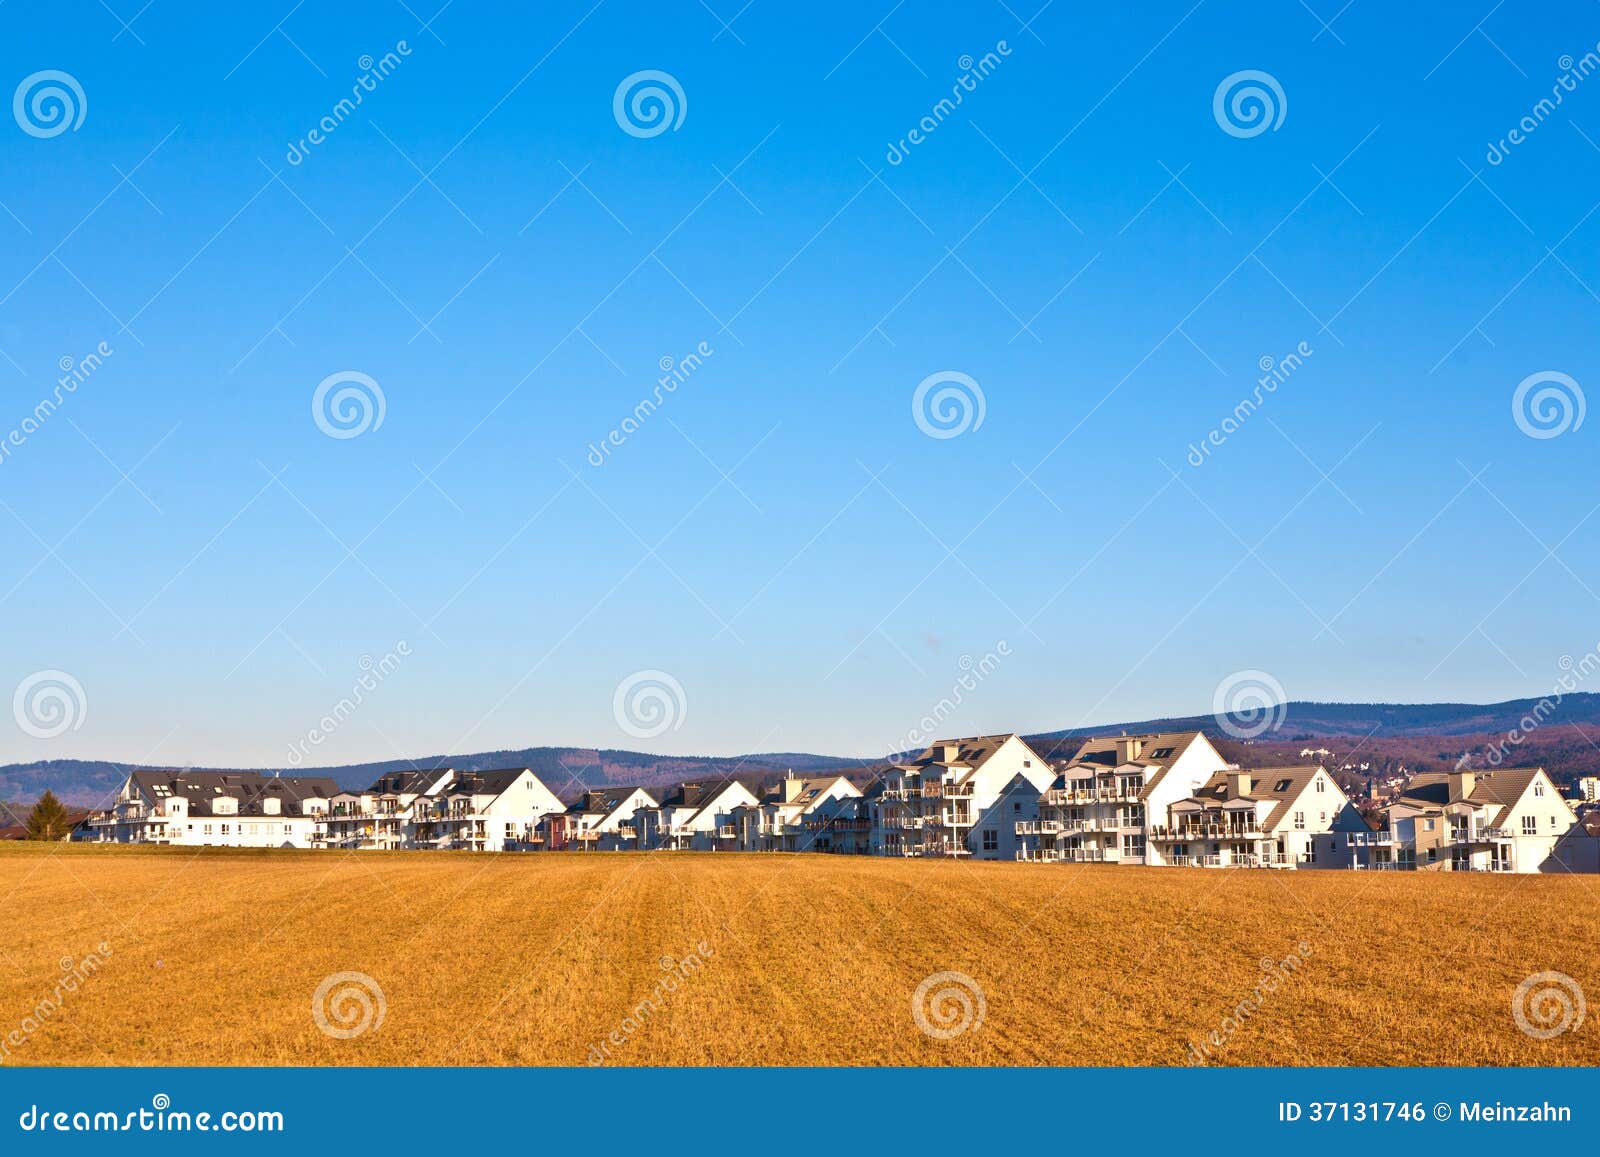 New Housing Area for Families Stock Photo - Image of housing, blue